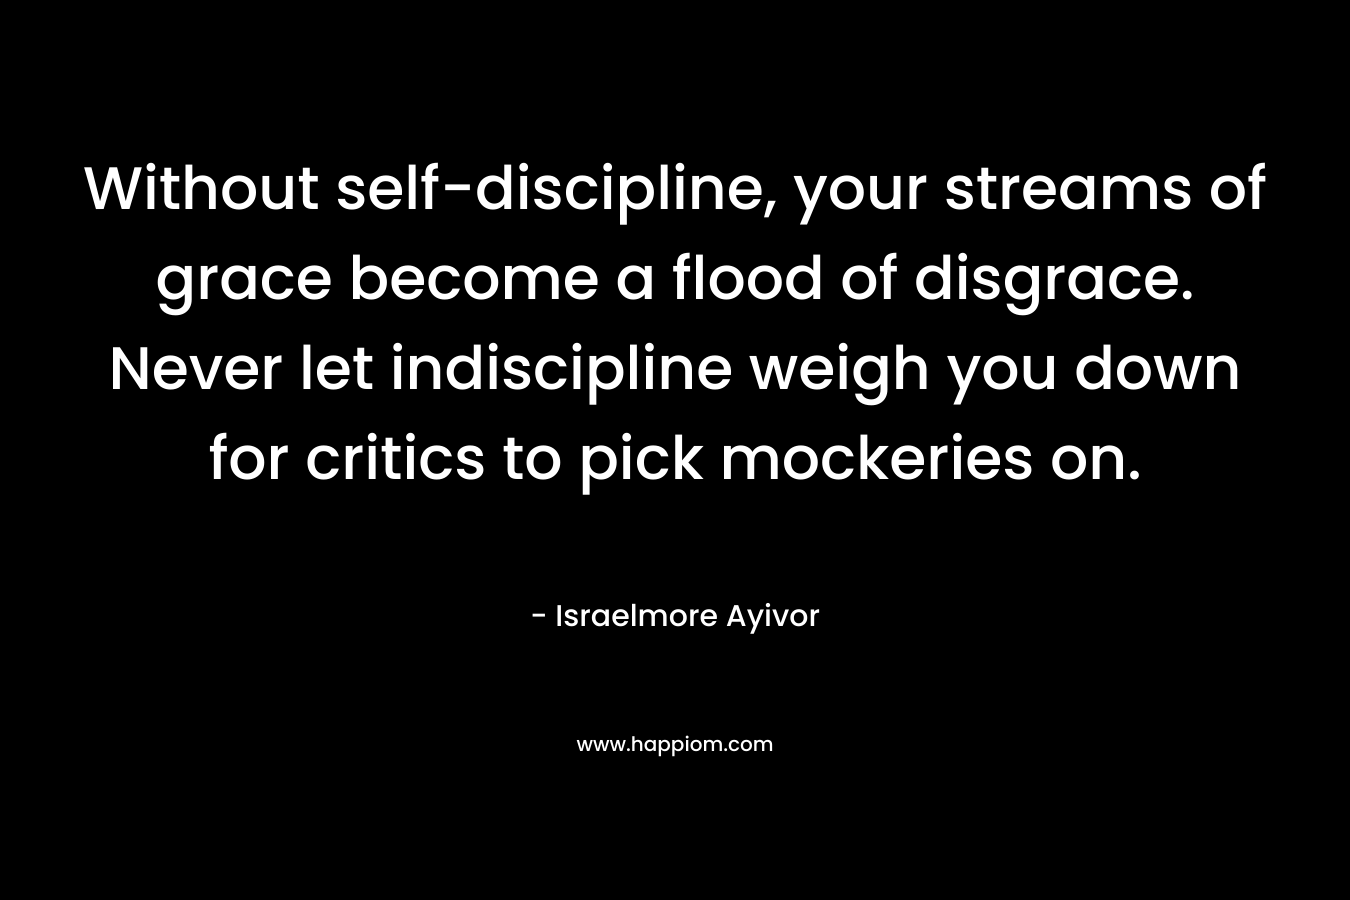 Without self-discipline, your streams of grace become a flood of disgrace. Never let indiscipline weigh you down for critics to pick mockeries on. – Israelmore Ayivor